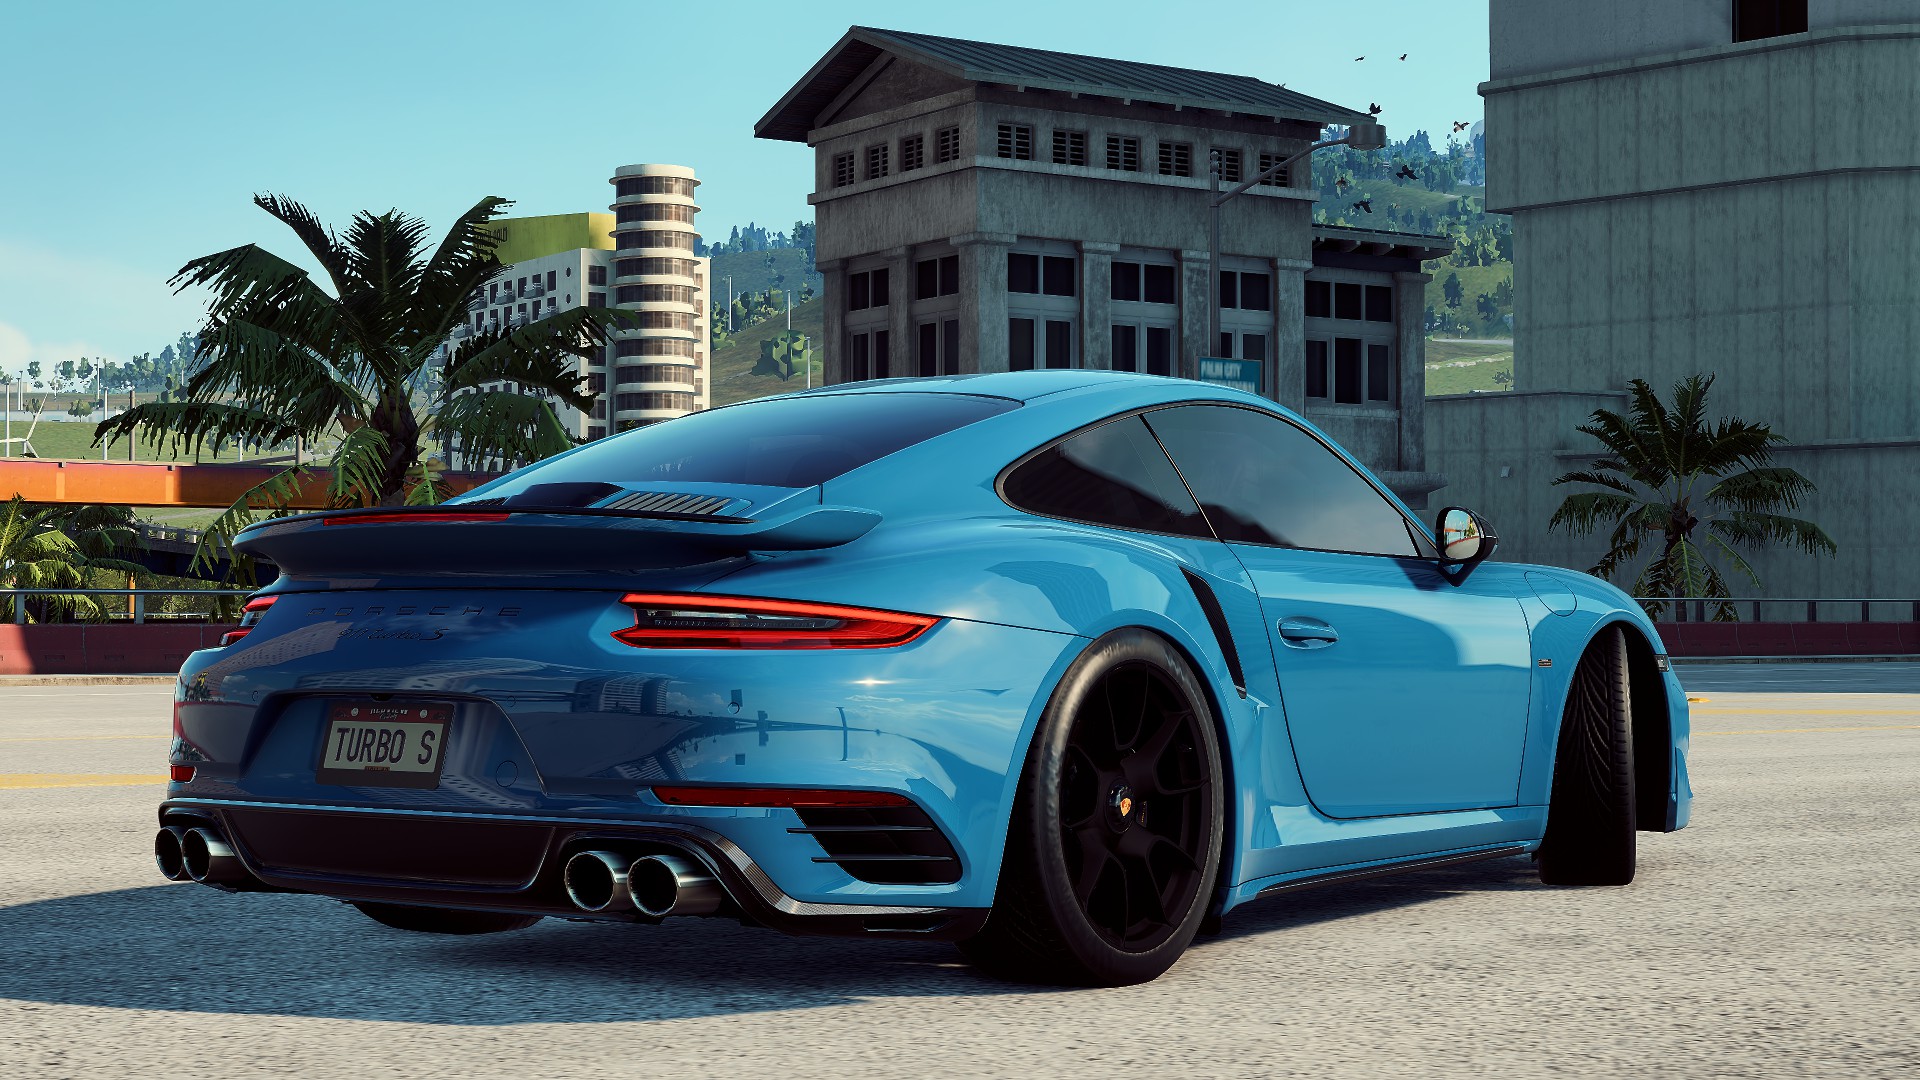 General 1920x1080 Porsche car 4K Need for Speed: Heat street view road city building turquoise rear view Porsche 911 video games GTA anniversary Dog Days